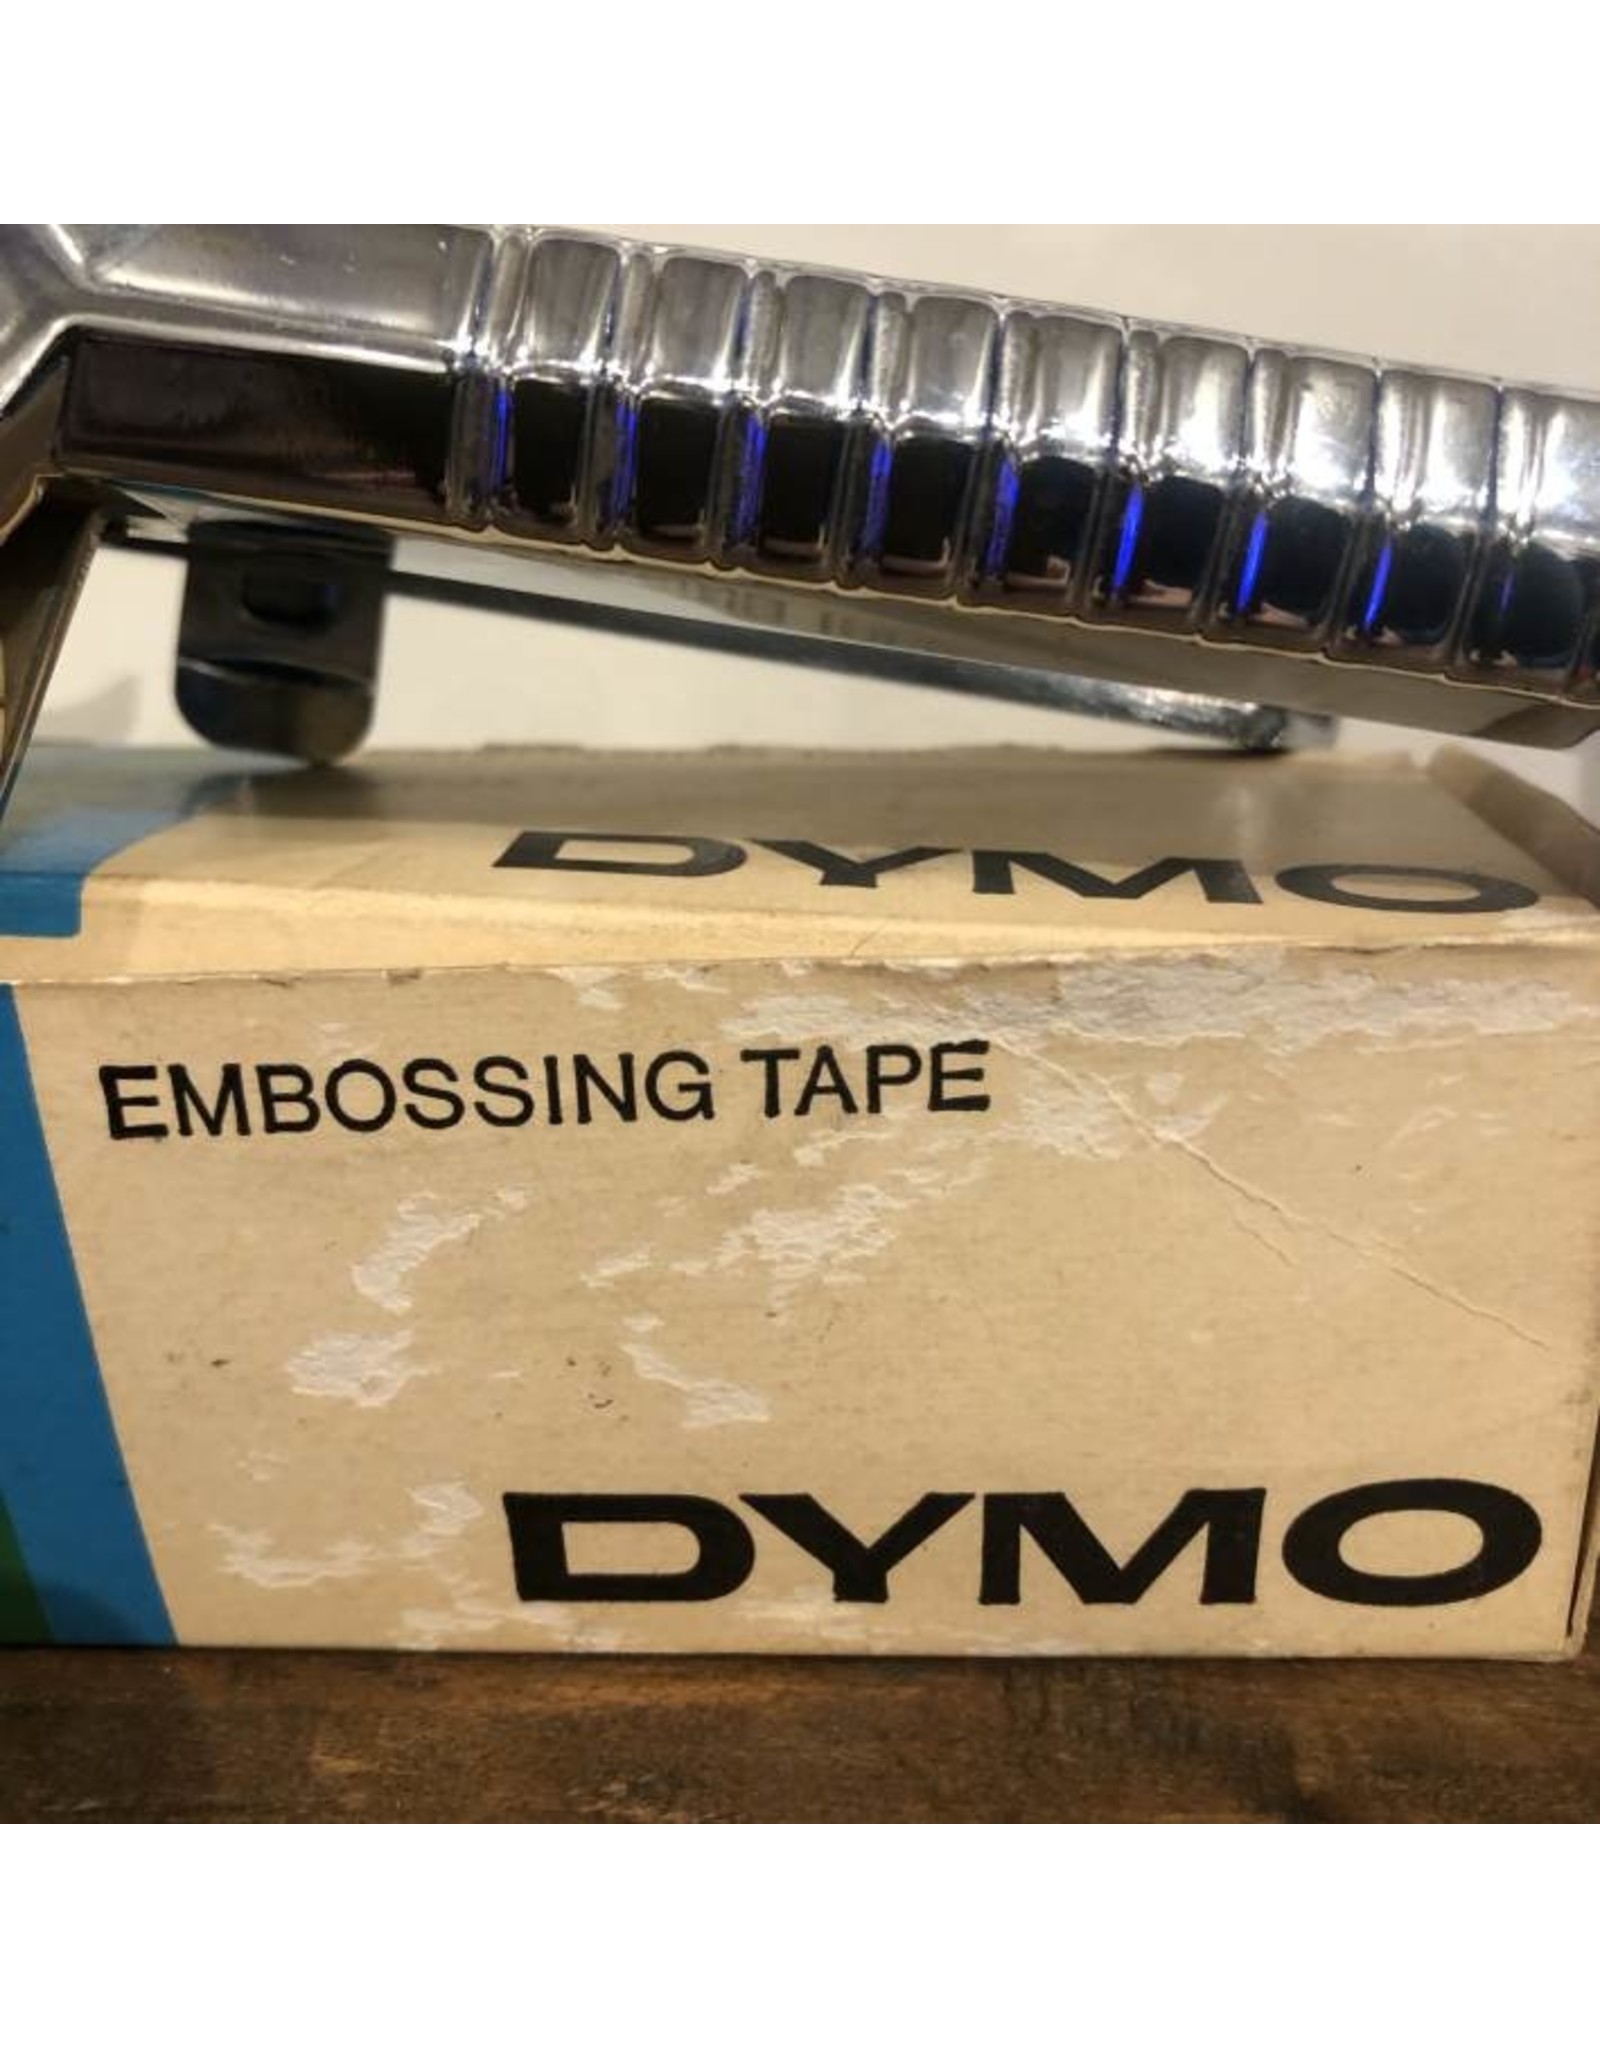 Labeller - Dymo Tapewriter M-5 with extra tapes